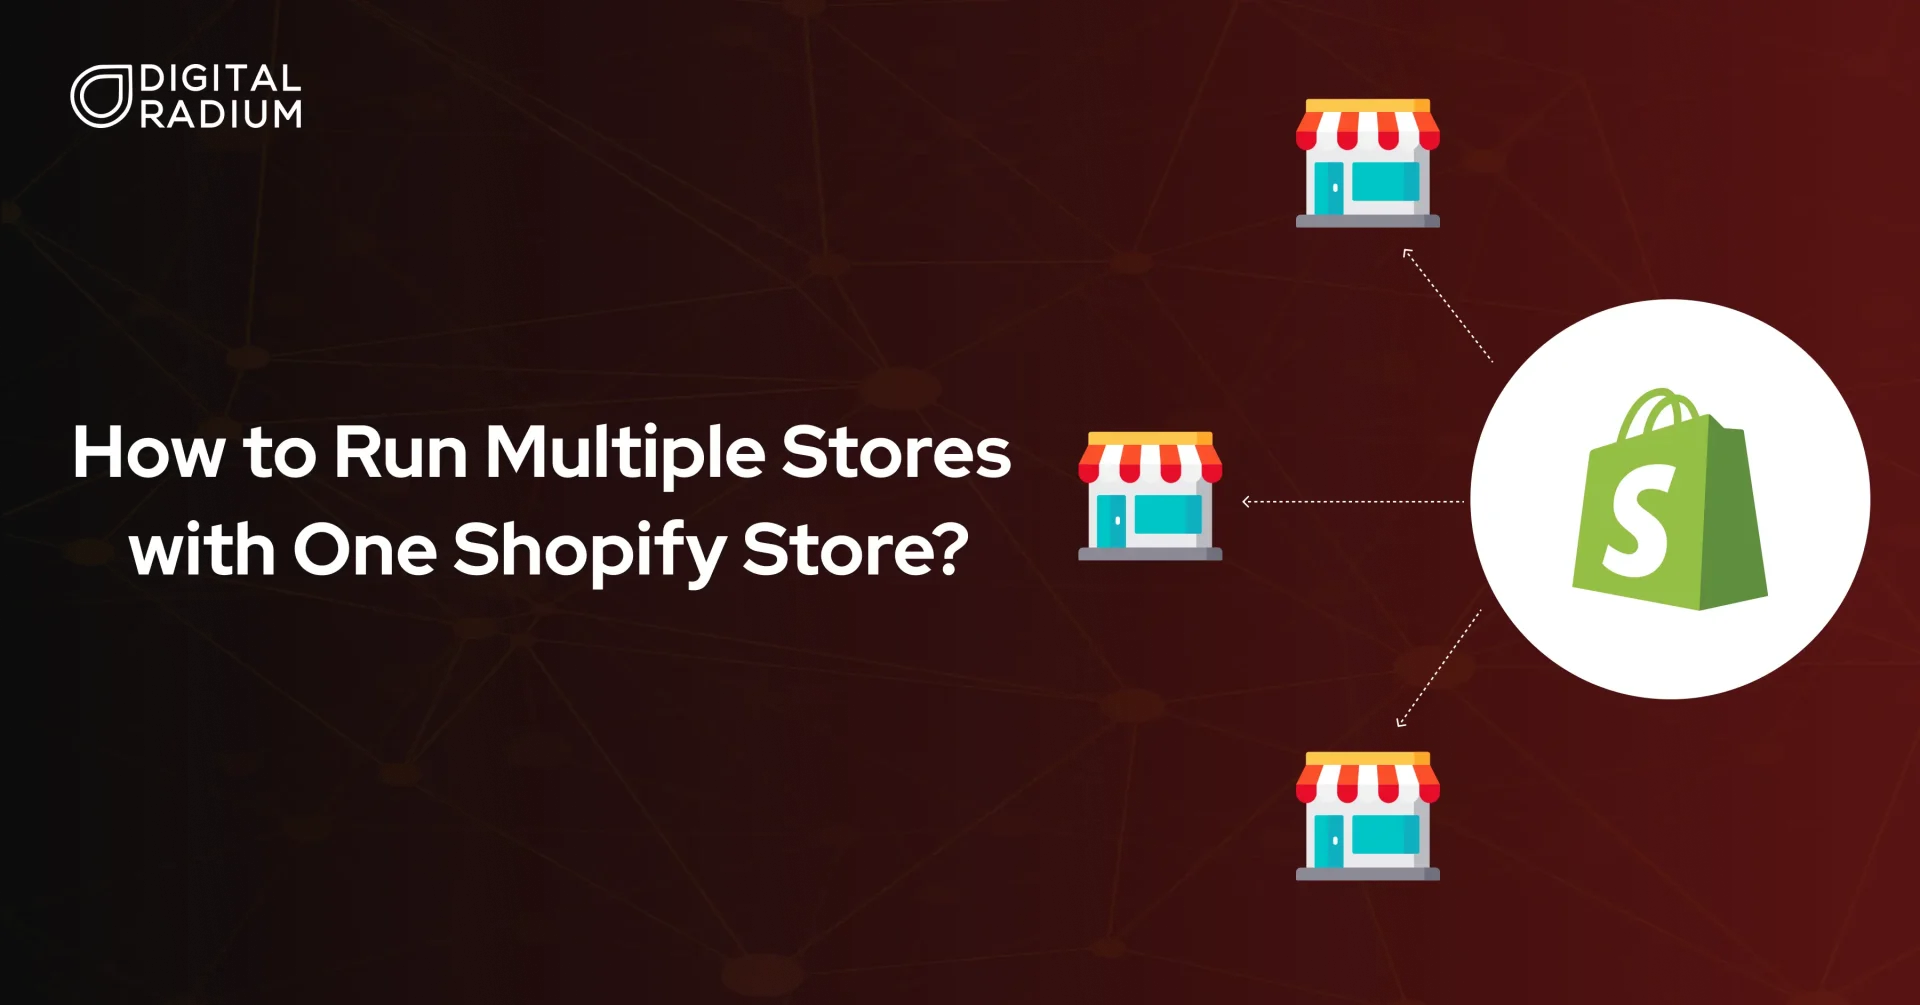 How to Run Multiple Stores with One Shopify Store?